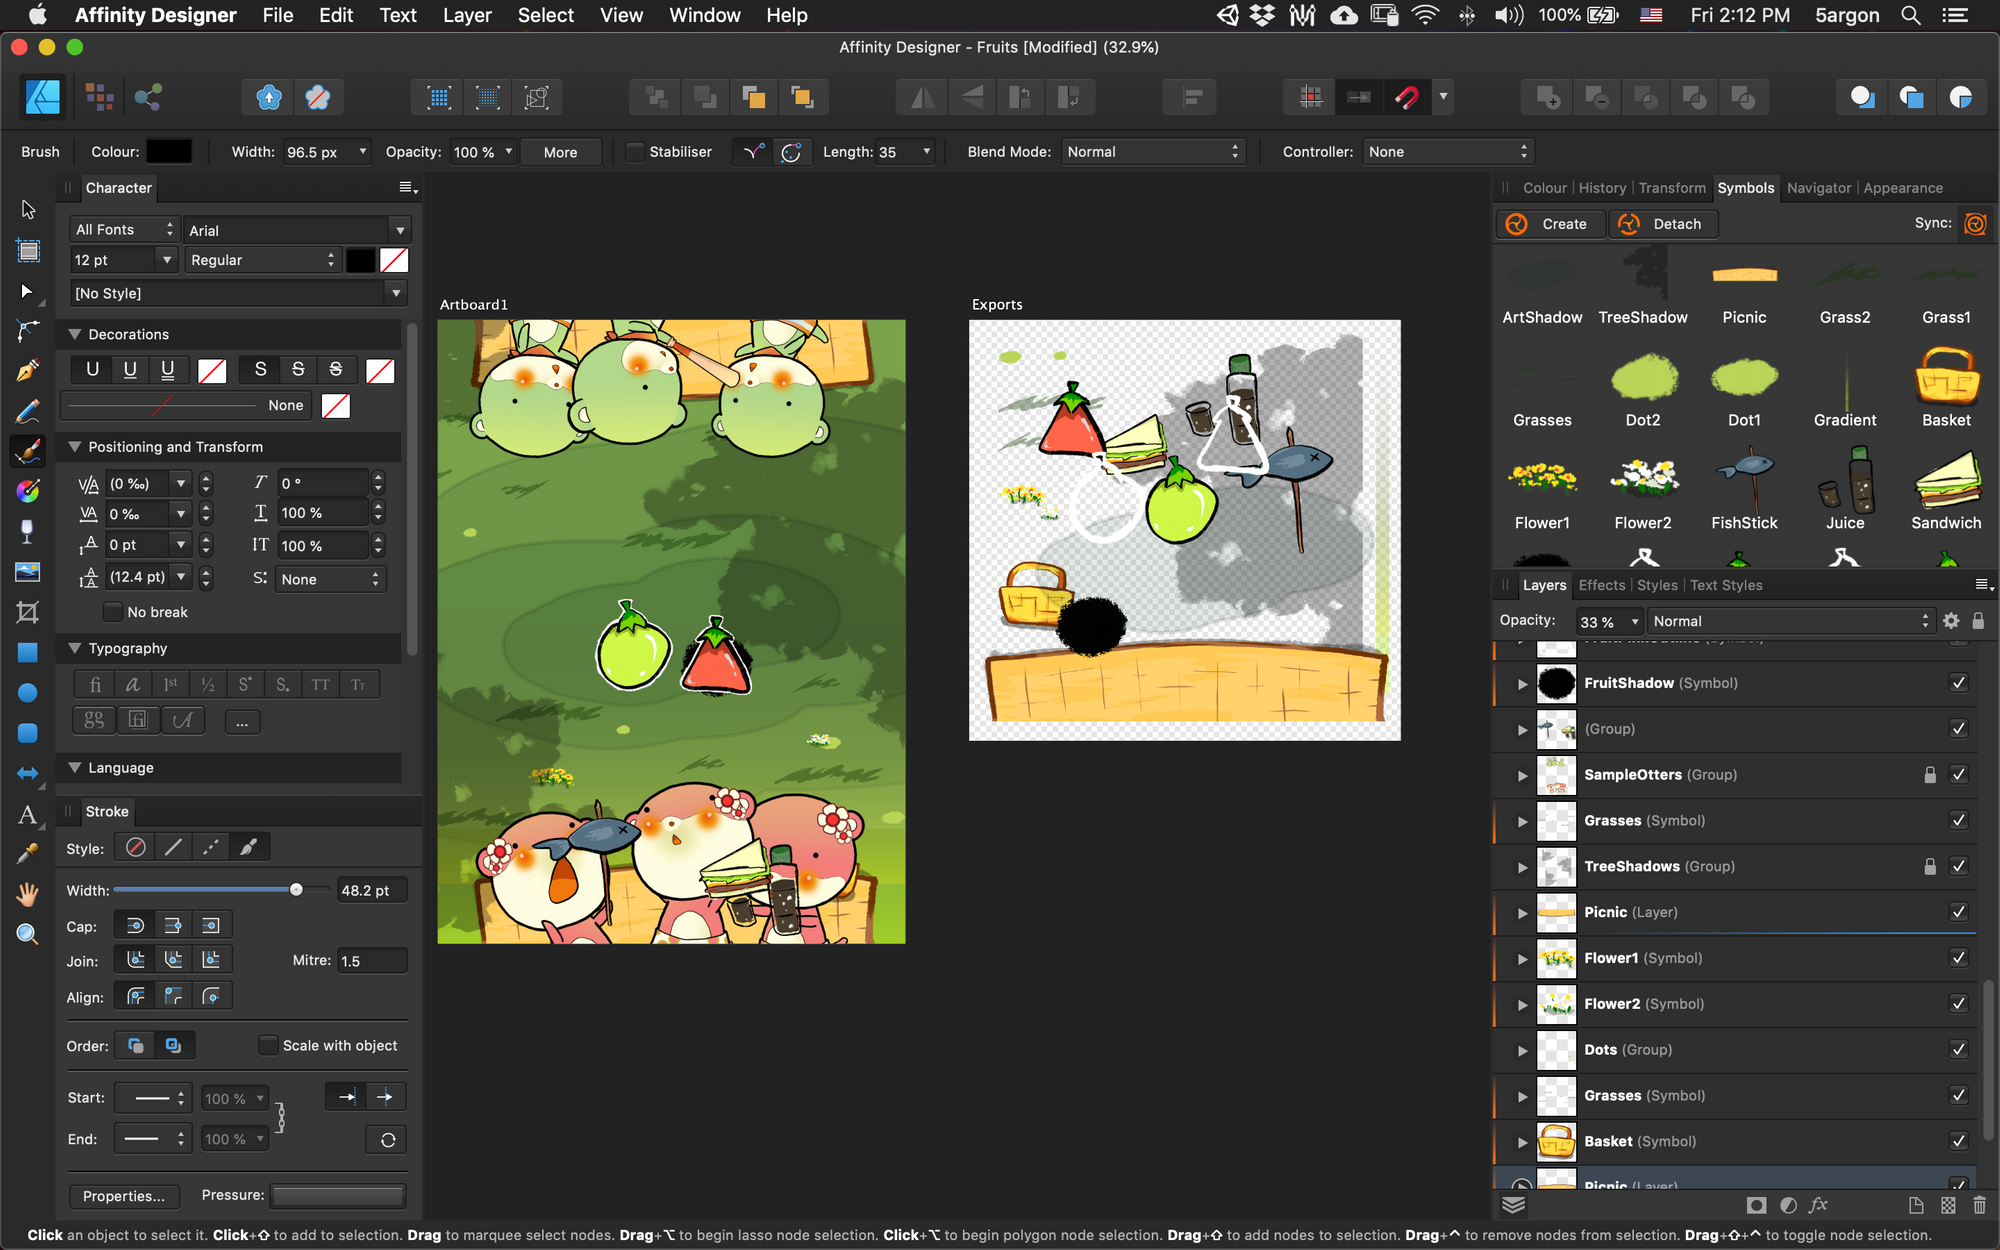 Unity 2D asset pipeline with Affinity Designer